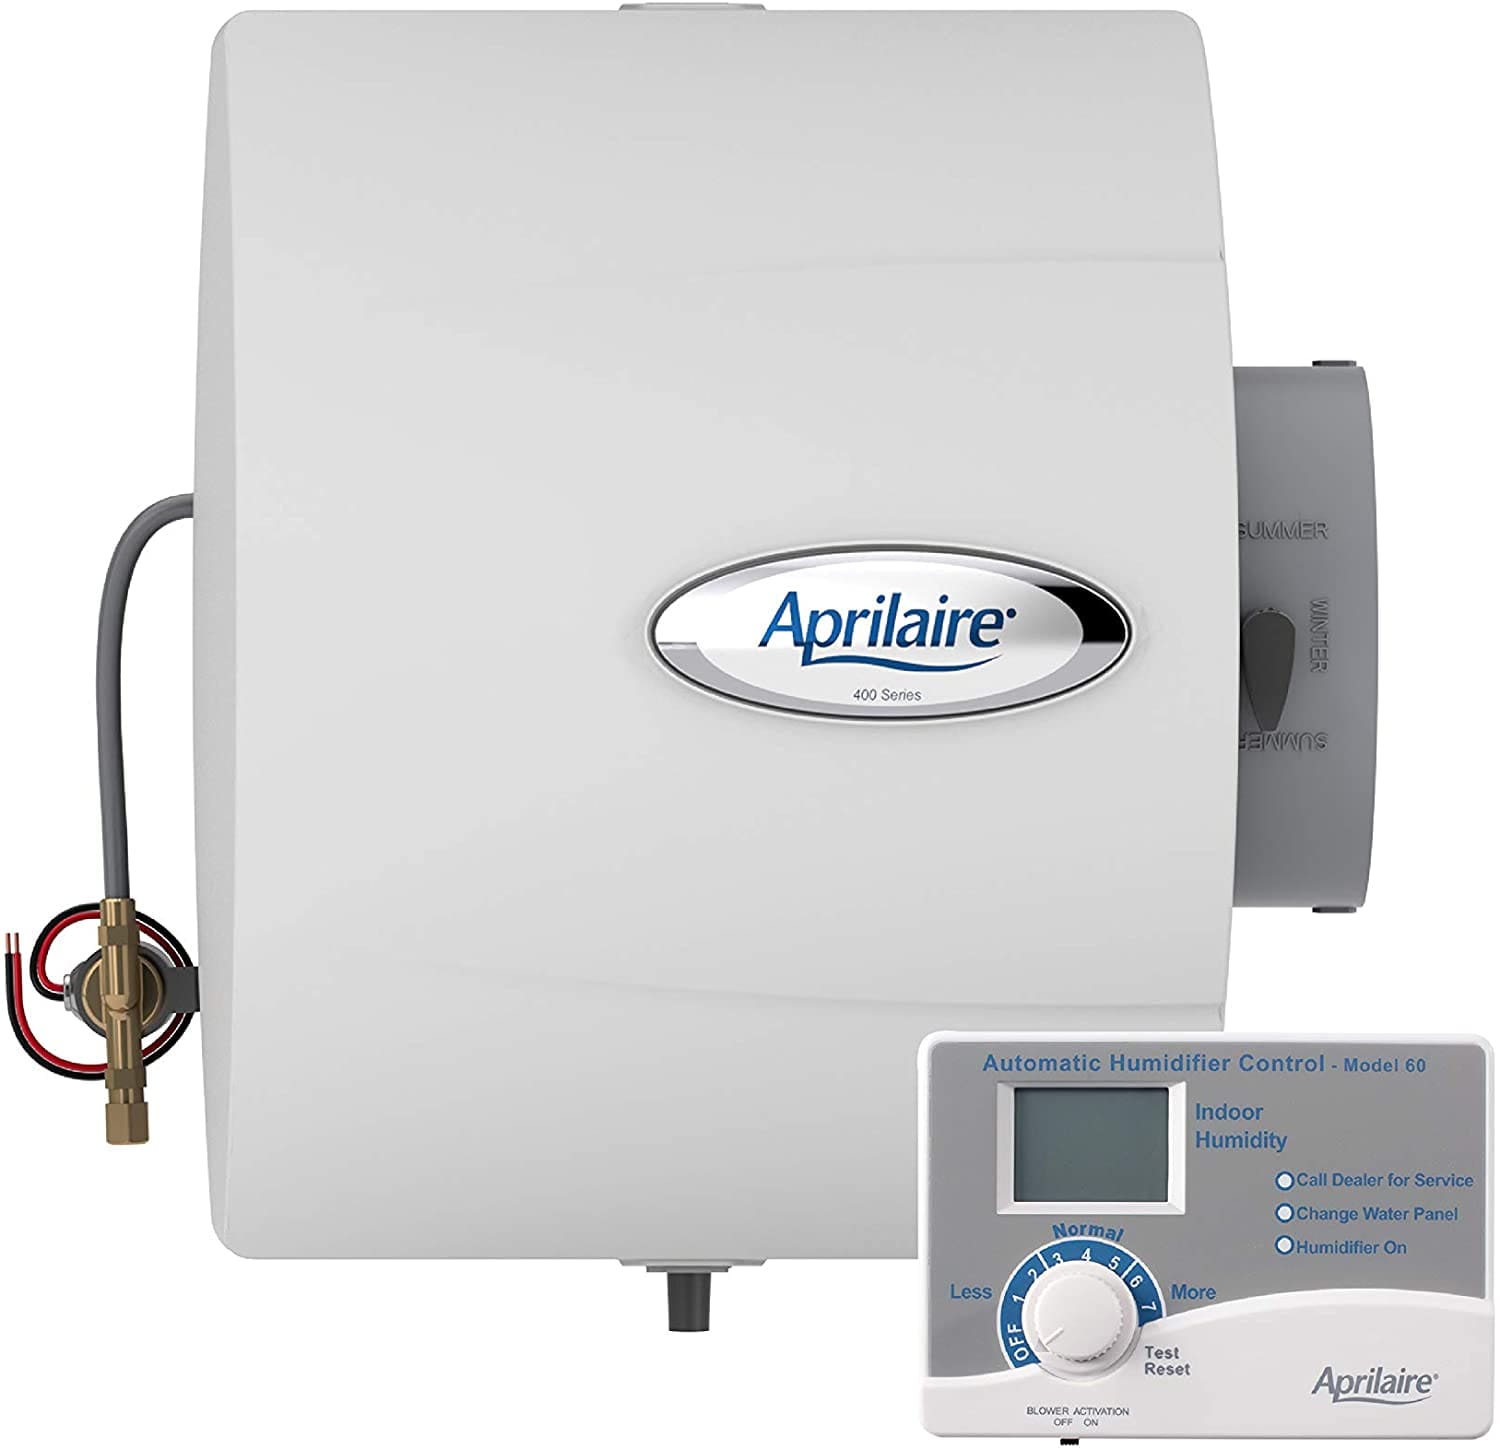 Aprilaire 400 Automatic Water-Saving Furnace Mount Humidifier